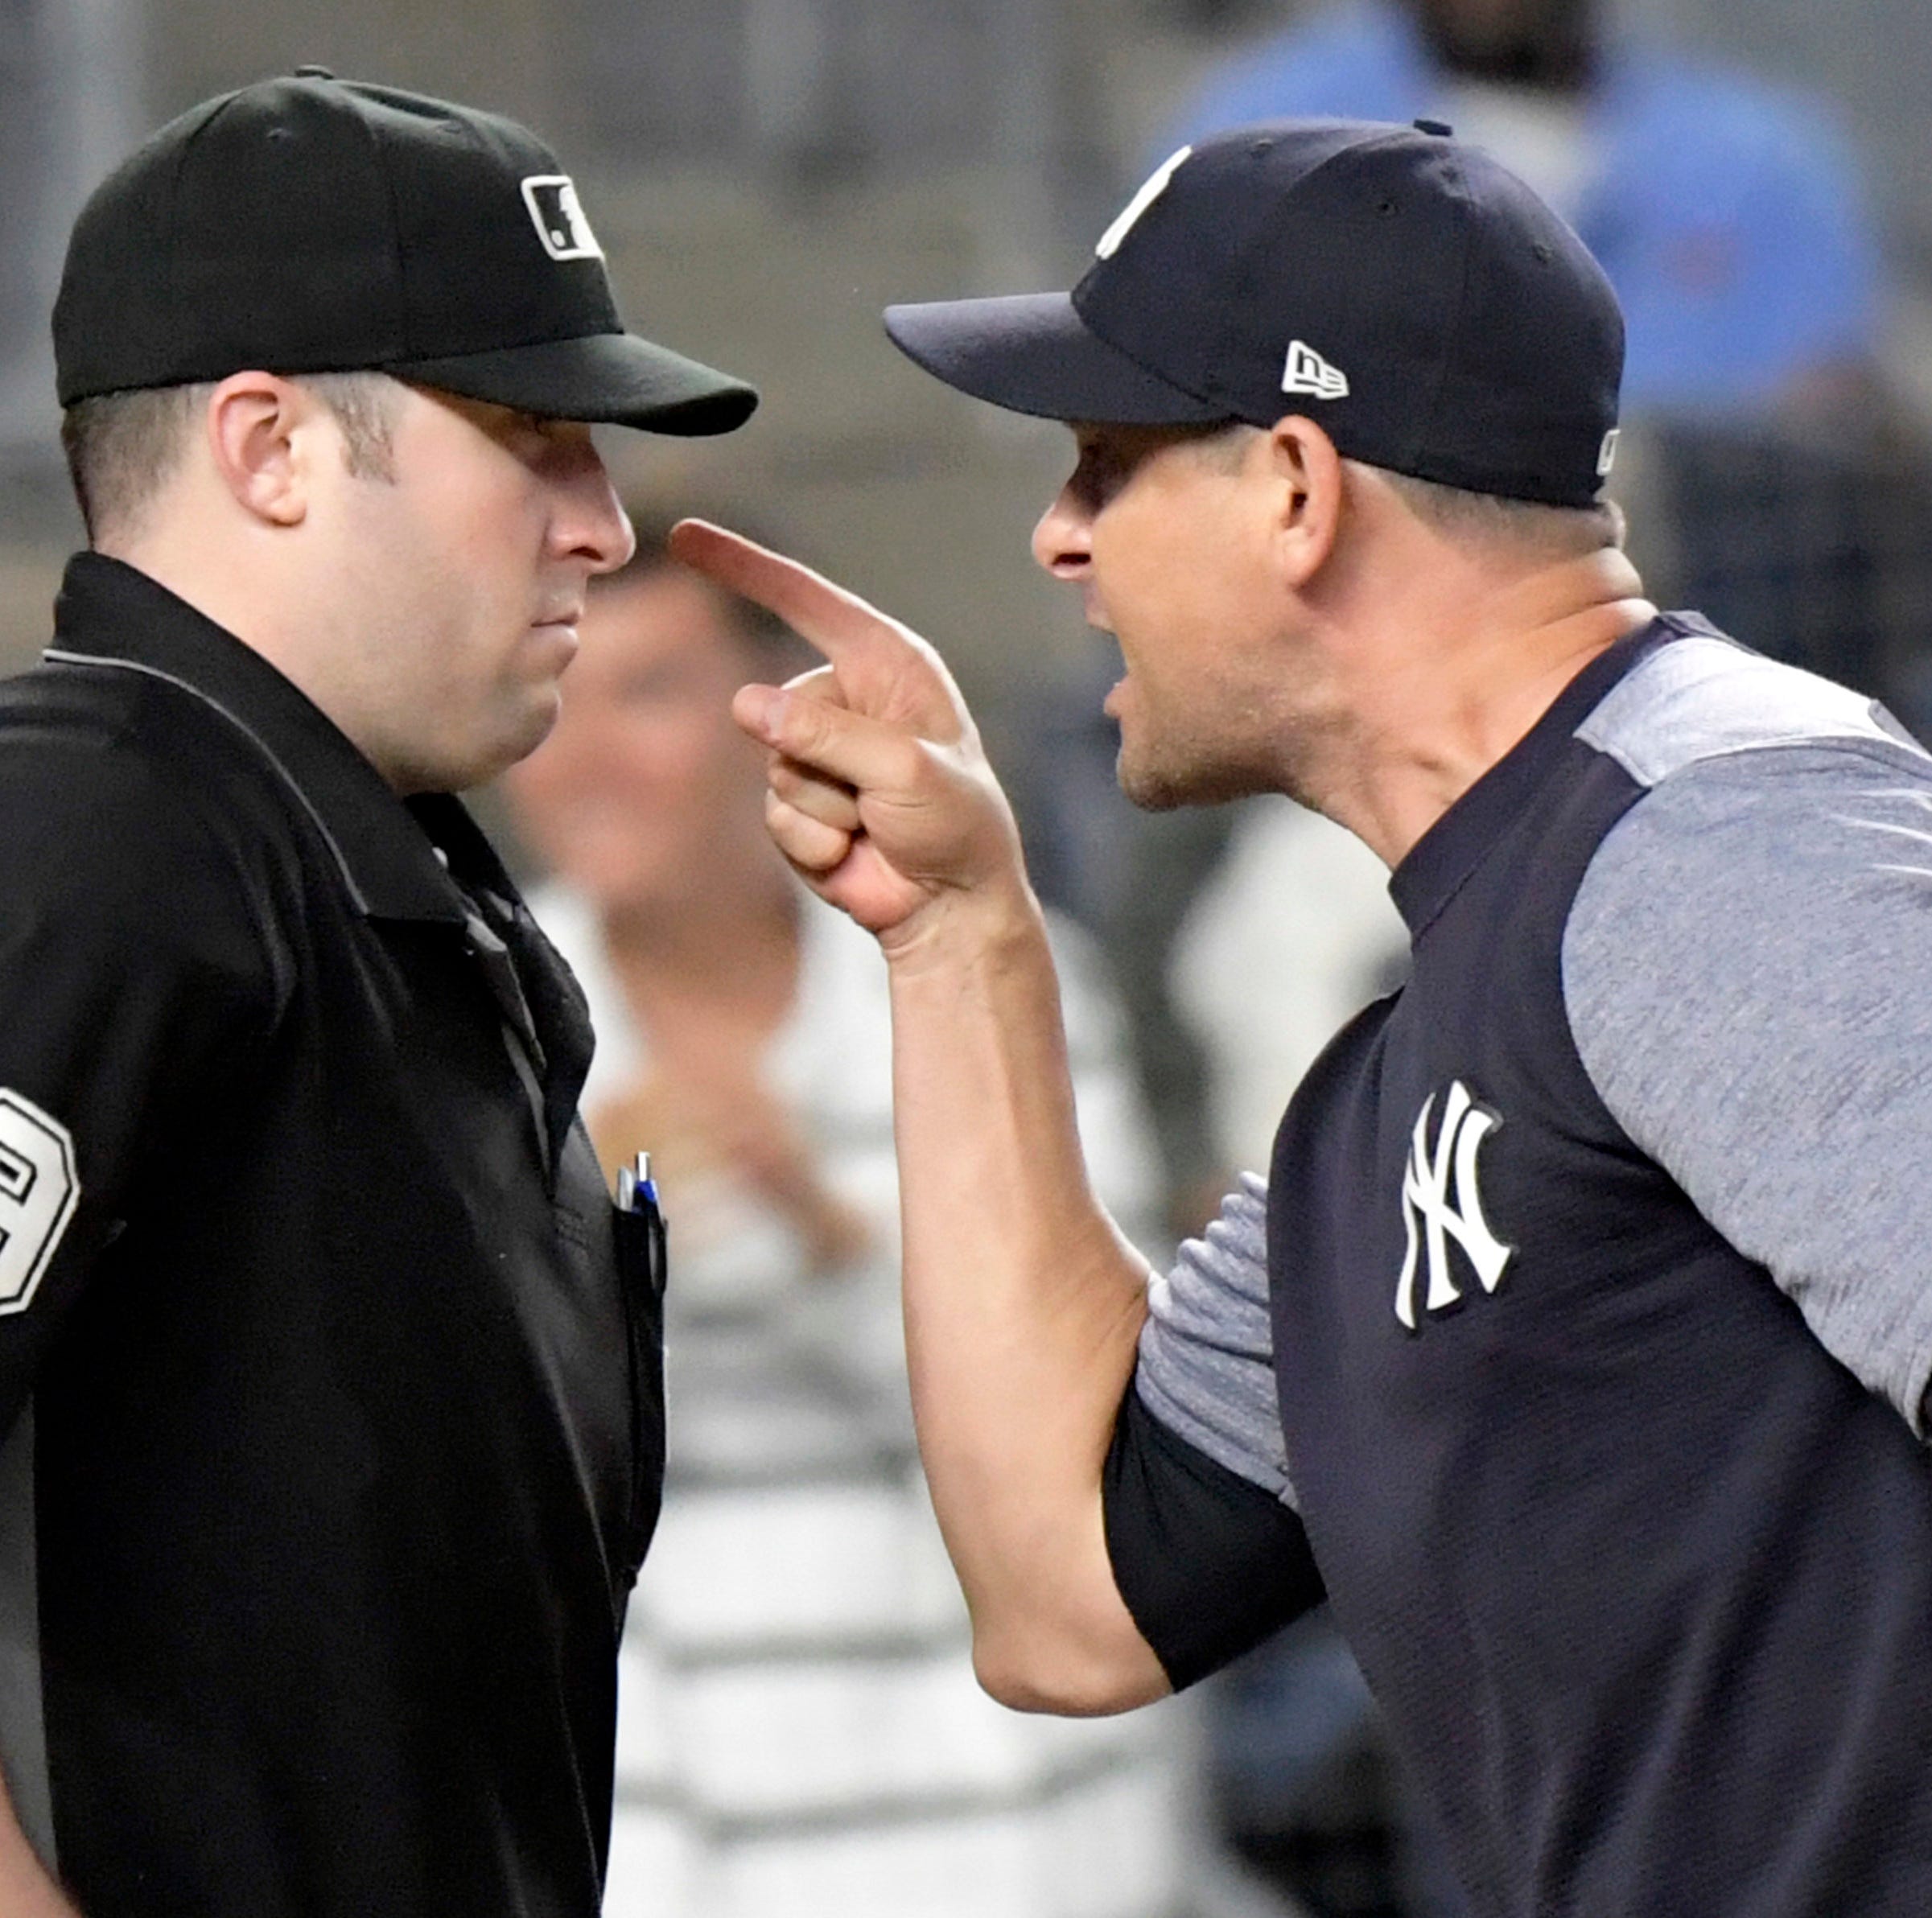 New York Yankees manager Aaron Boone, right, confronts umpire Nic Lentz (59) before being tossed from a baseball game against the Detroit Tigers during the fifth inning Friday, Aug. 31, 2018, at Yankee Stadium in New York.